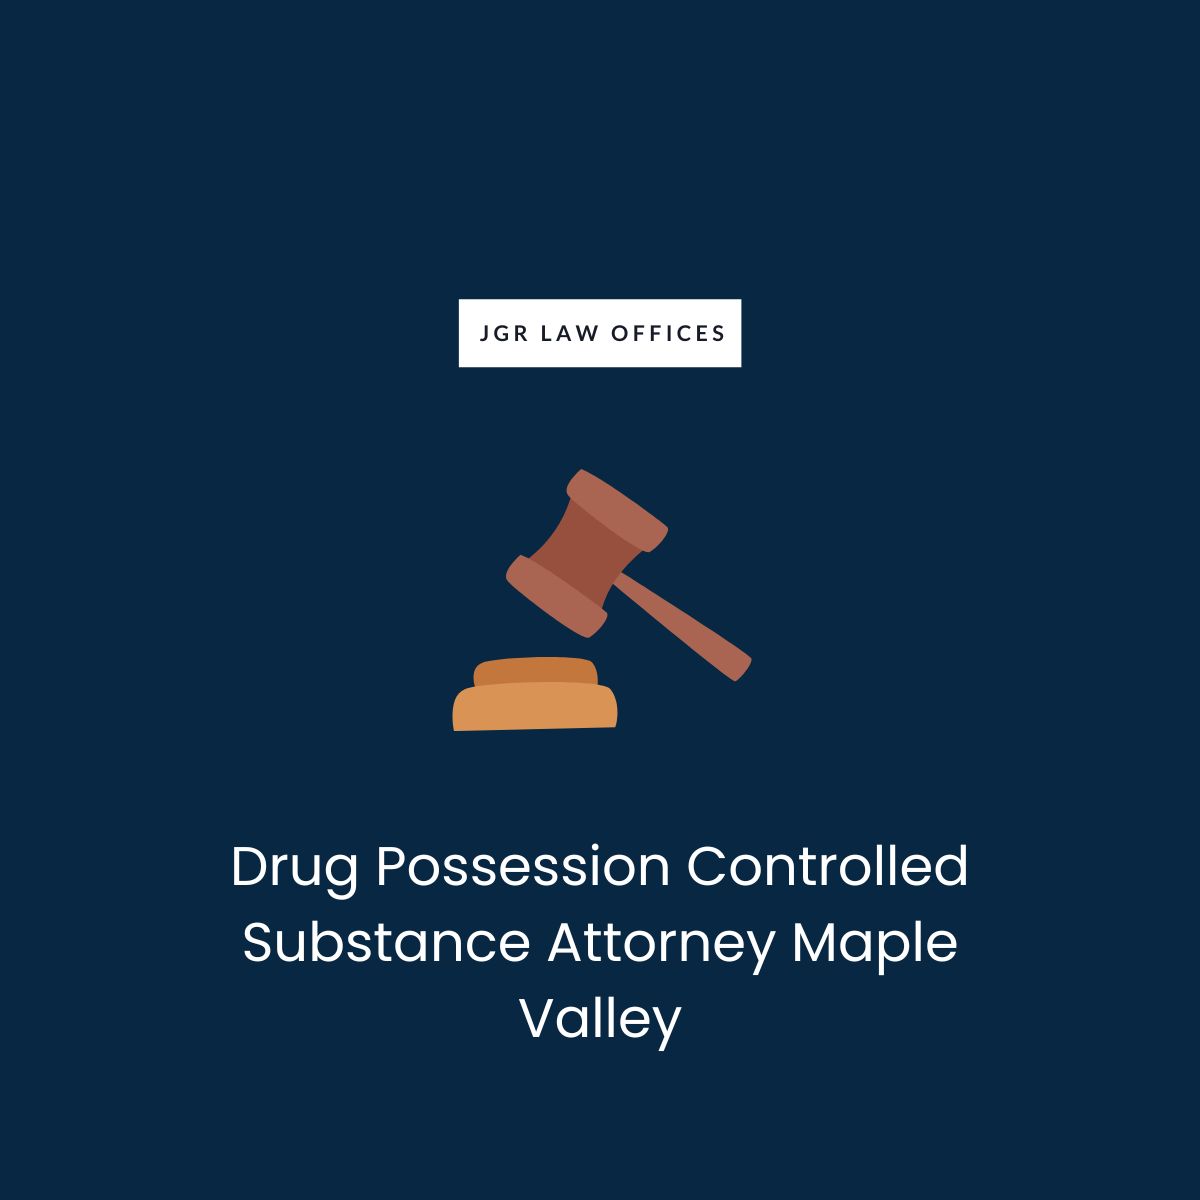 Drug Possession Controlled Substance Lawyer Maple Valley Drug Possession Controlled Substance Drug Possession Controlled Substance